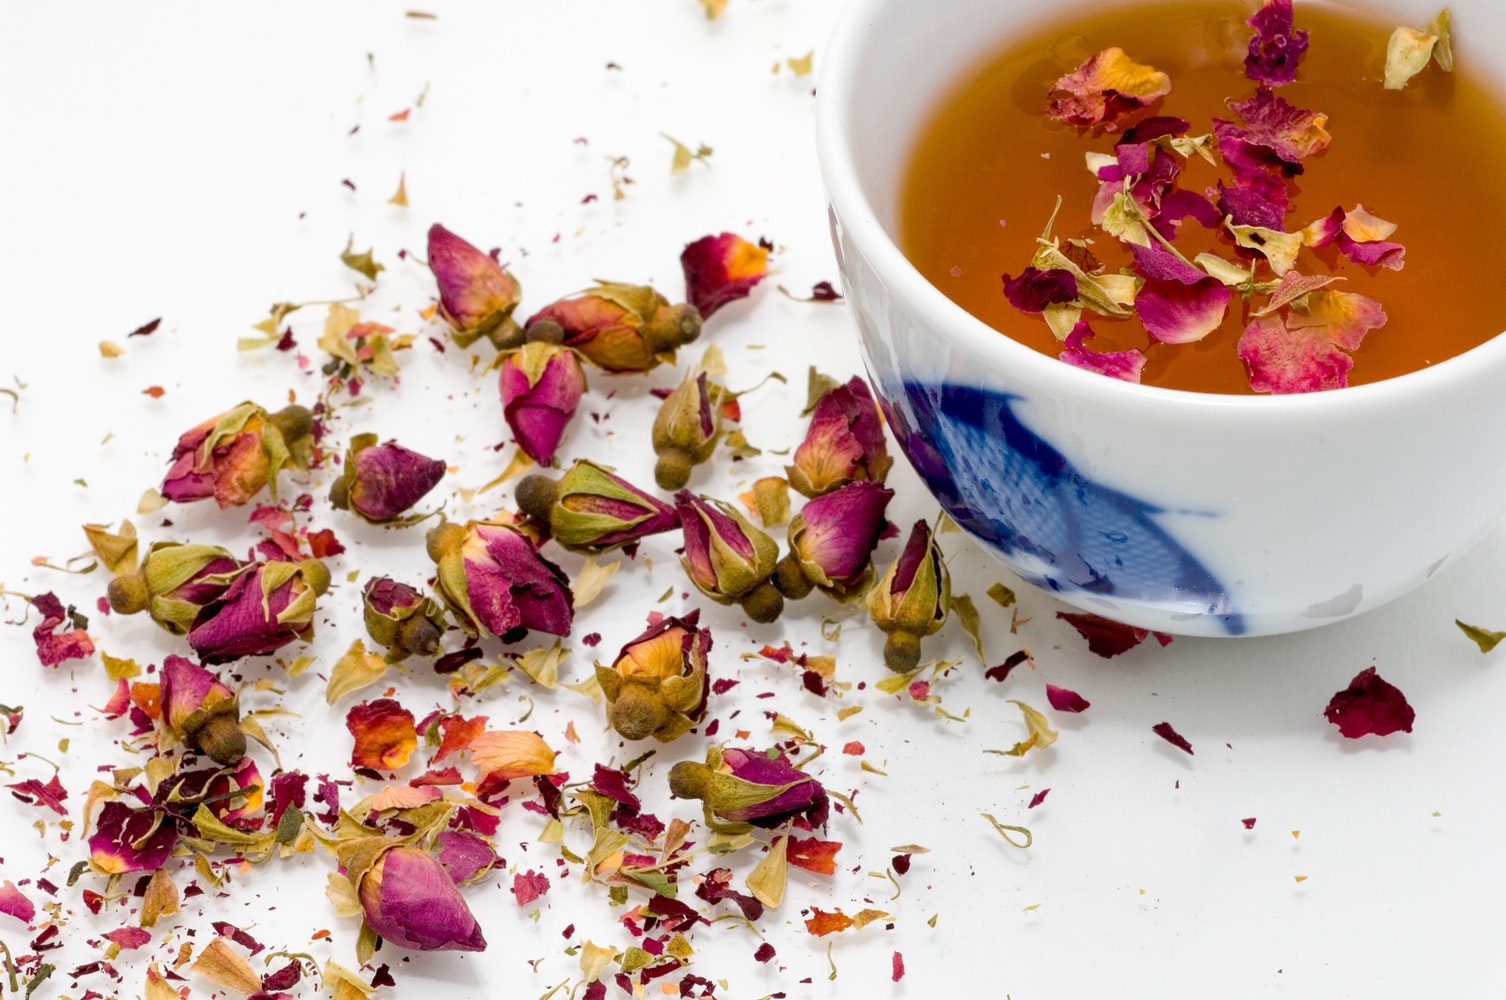 Rose Bud Tea: Benefits, Side Effects, and Flavor Profile